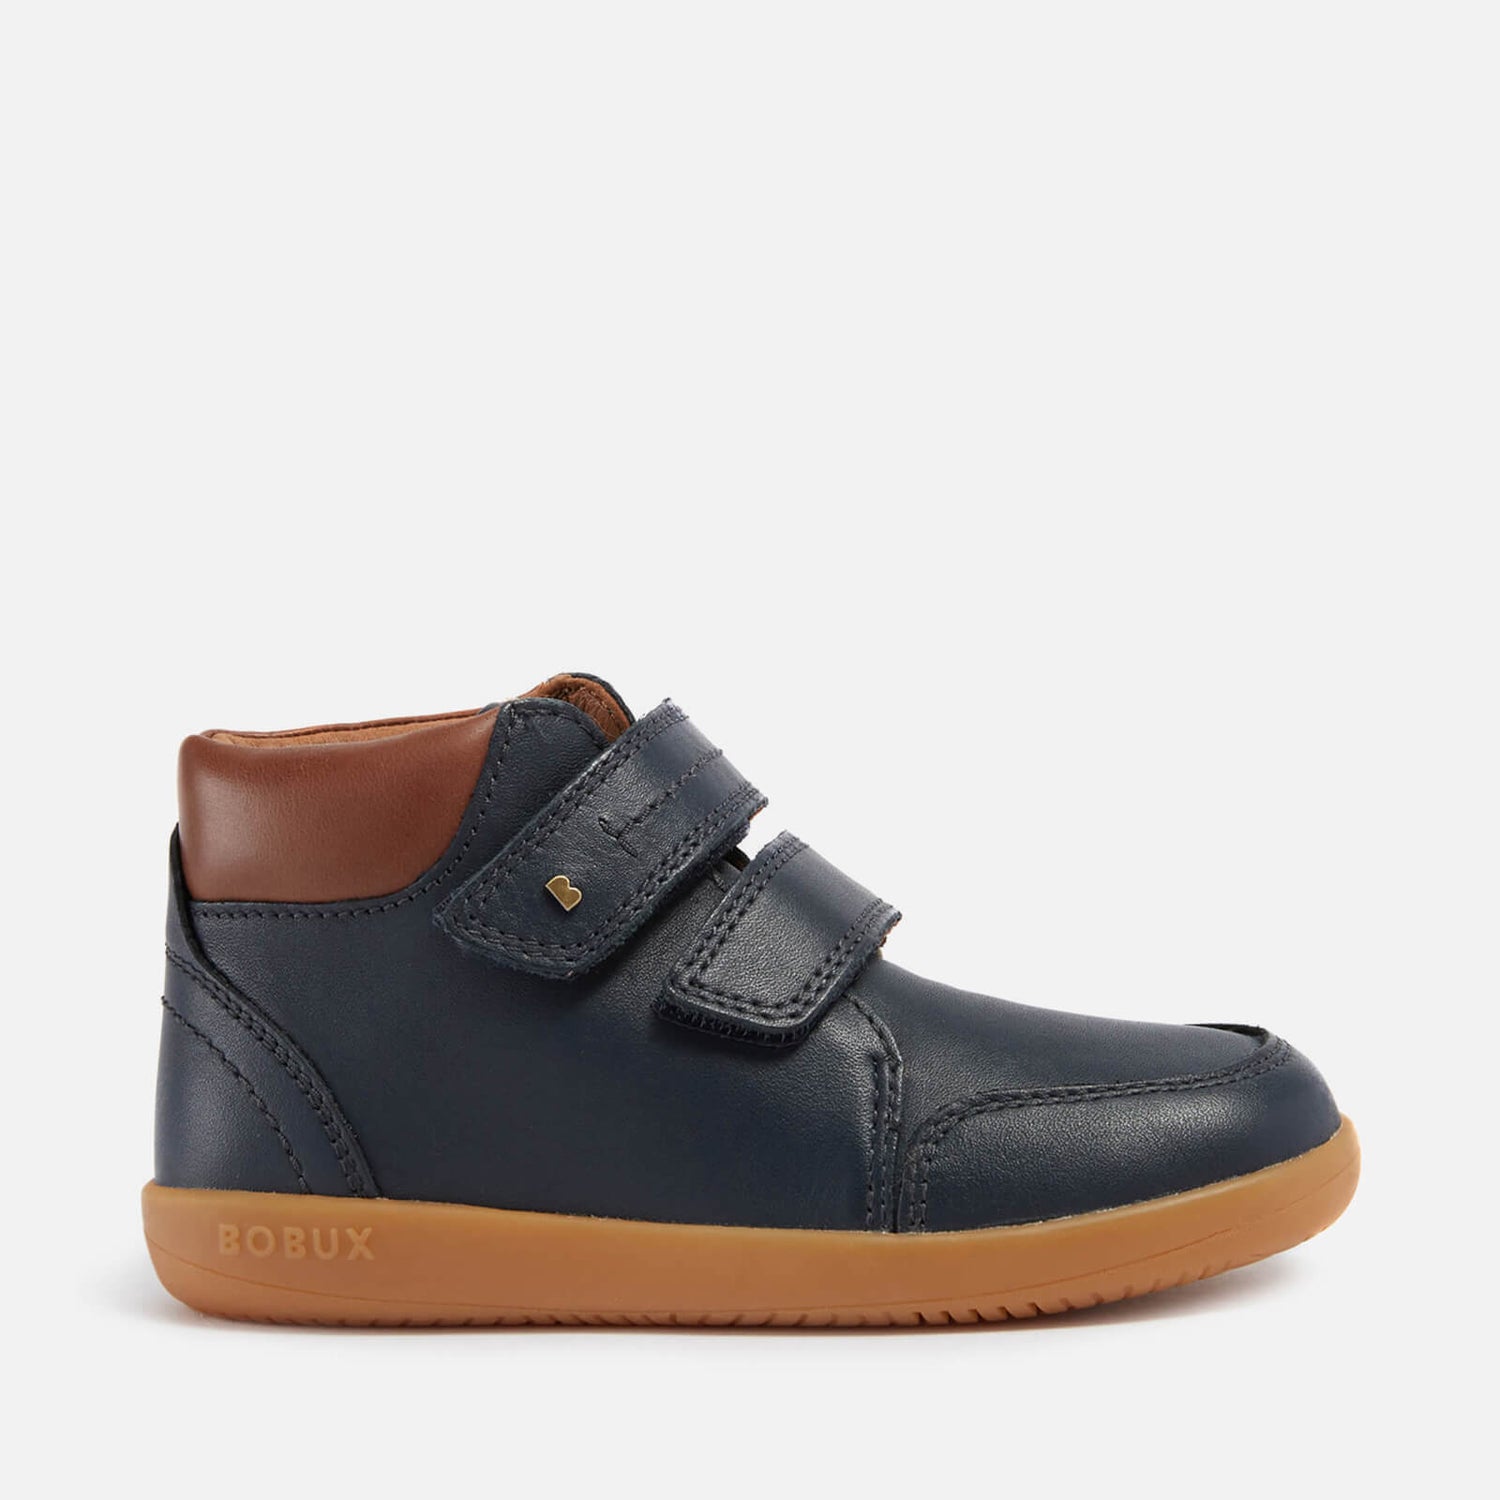 Bobux Kids' Timber Leather Boots